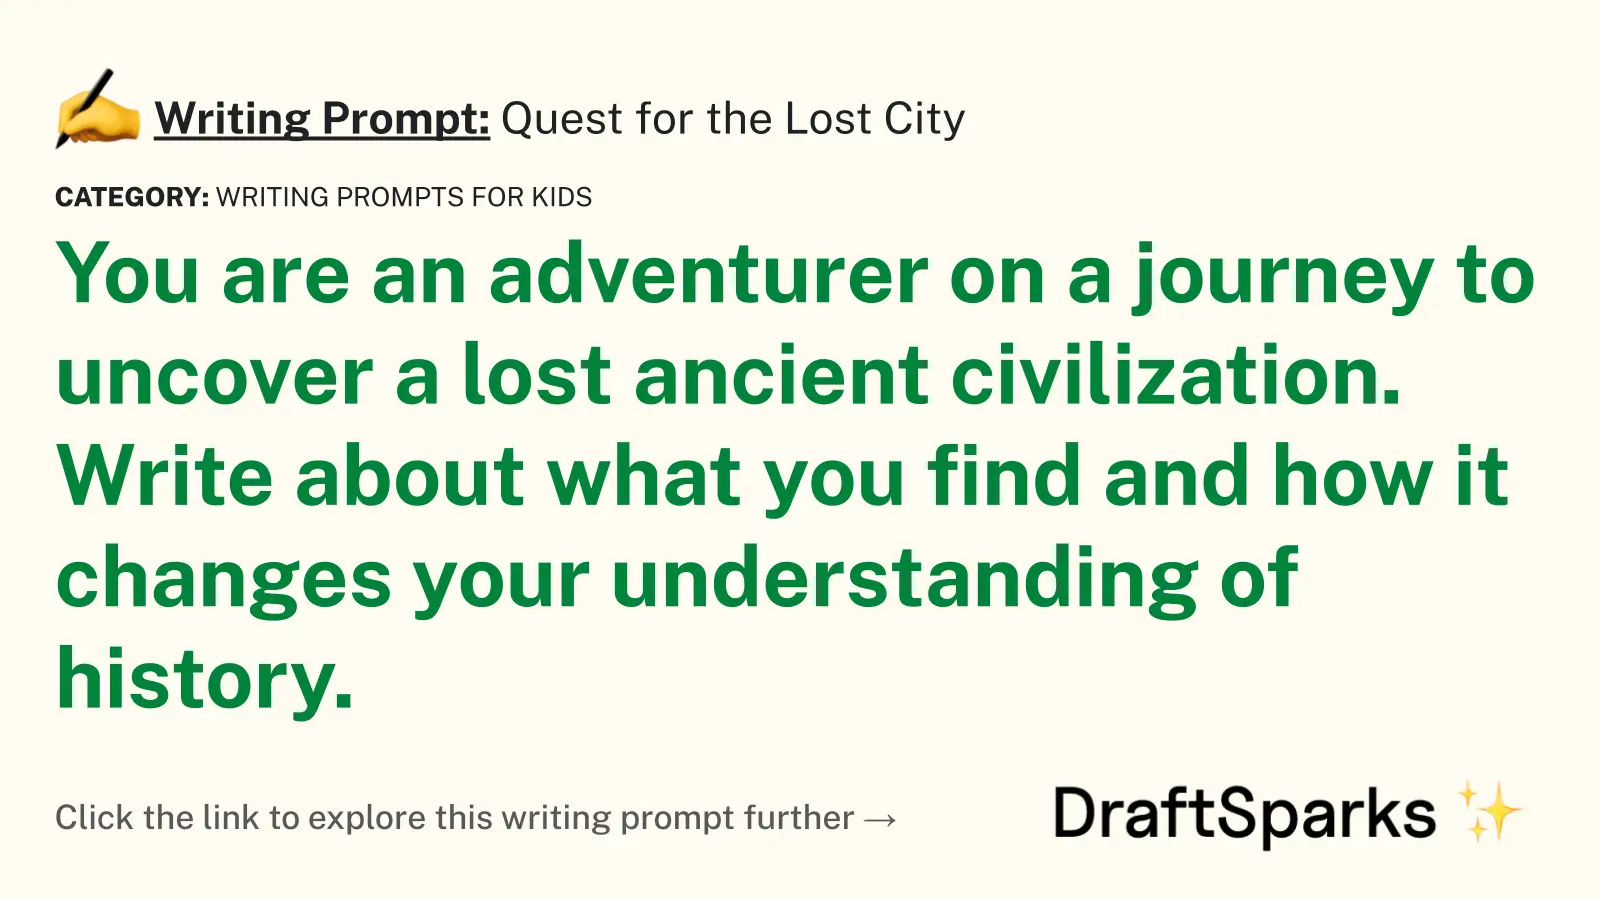 Quest for the Lost City